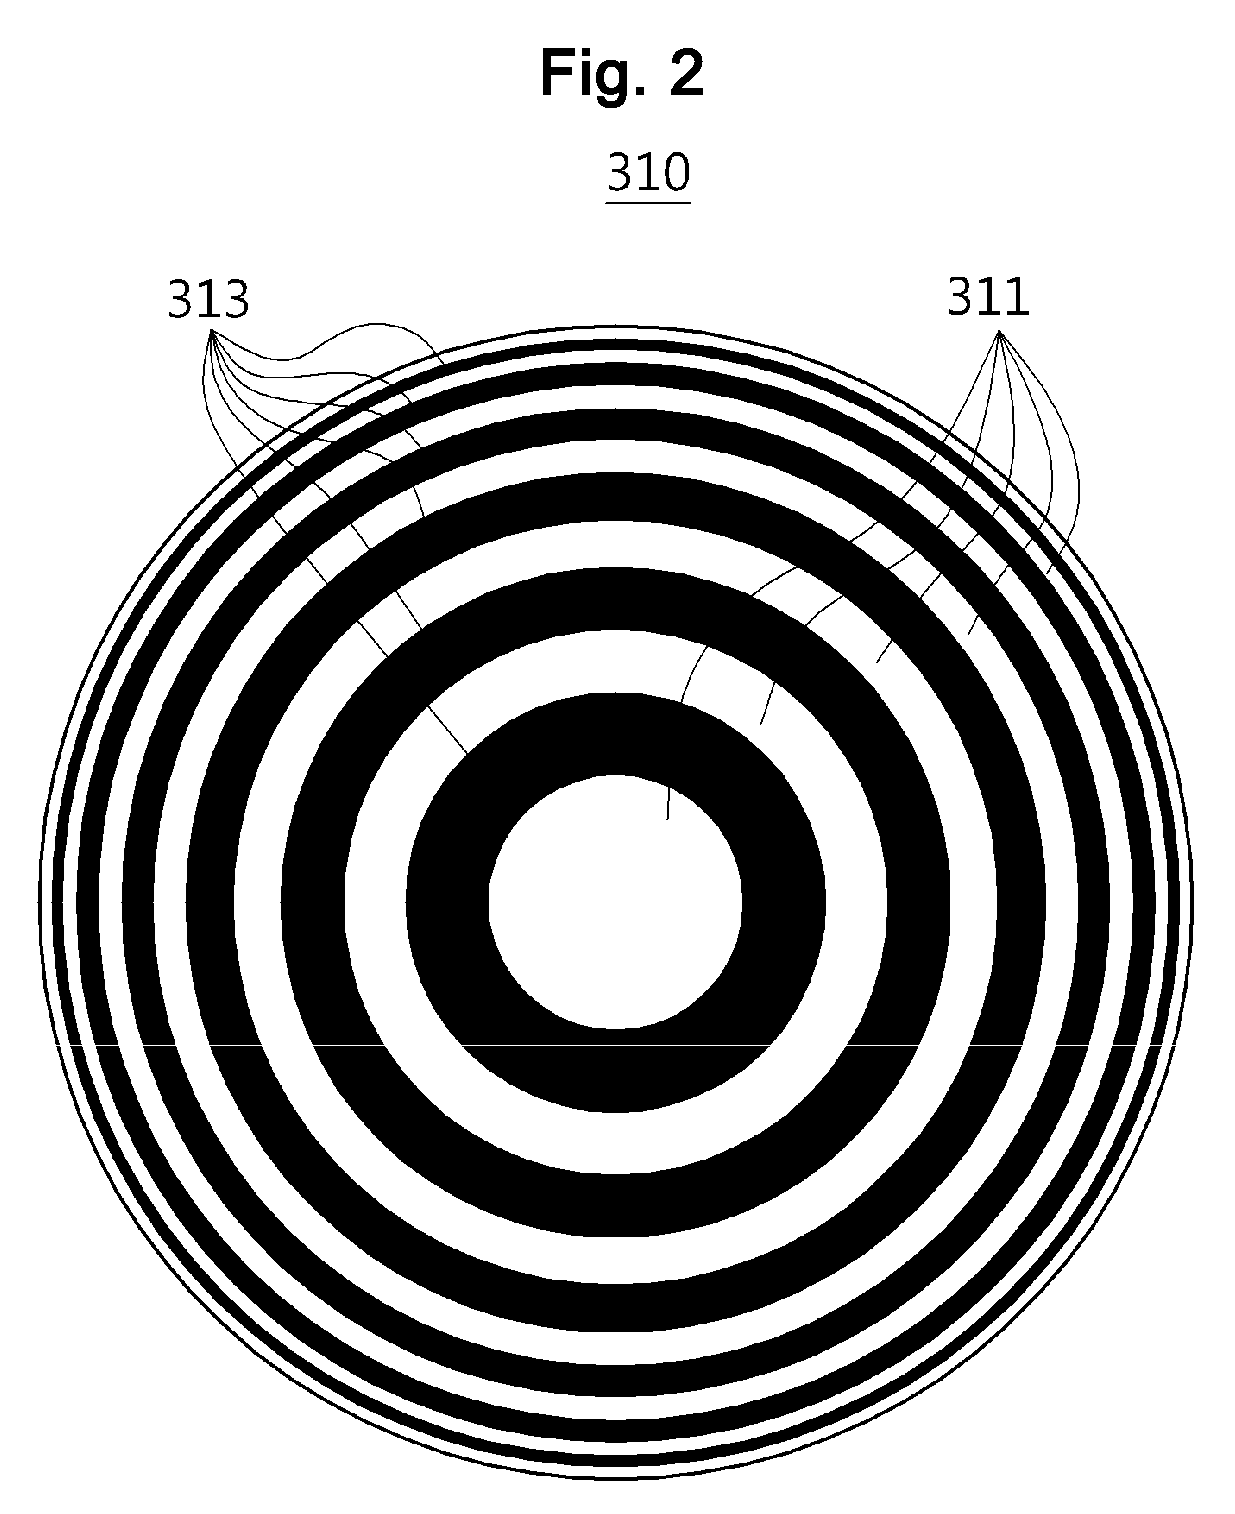 Fiber lens with fresnel zone plate lens and method for producing the same